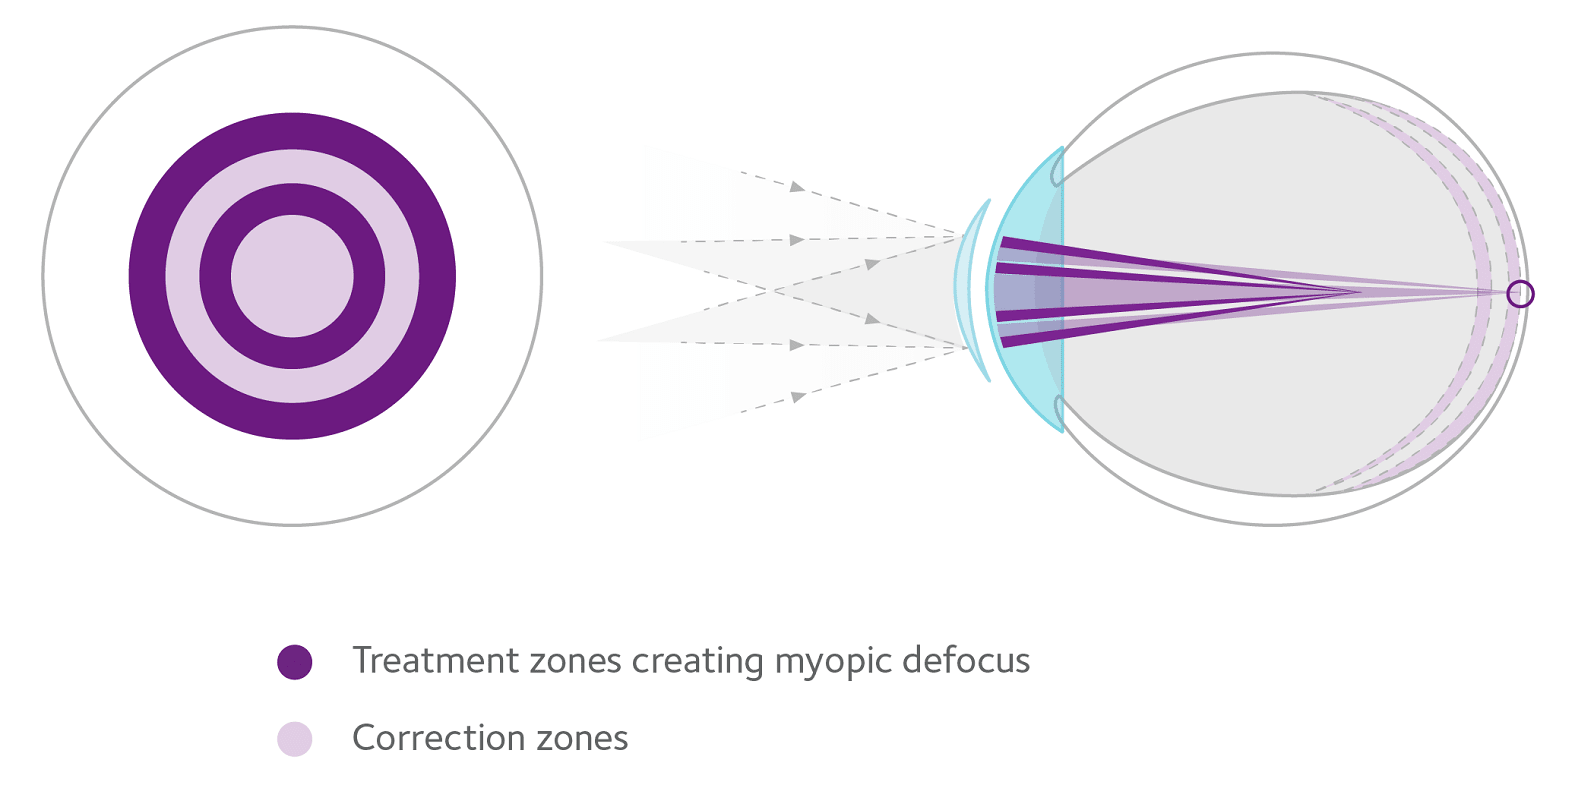 Choroidal thickness may be a predictor of the efficacy of MiSight lenses for treating myopia.